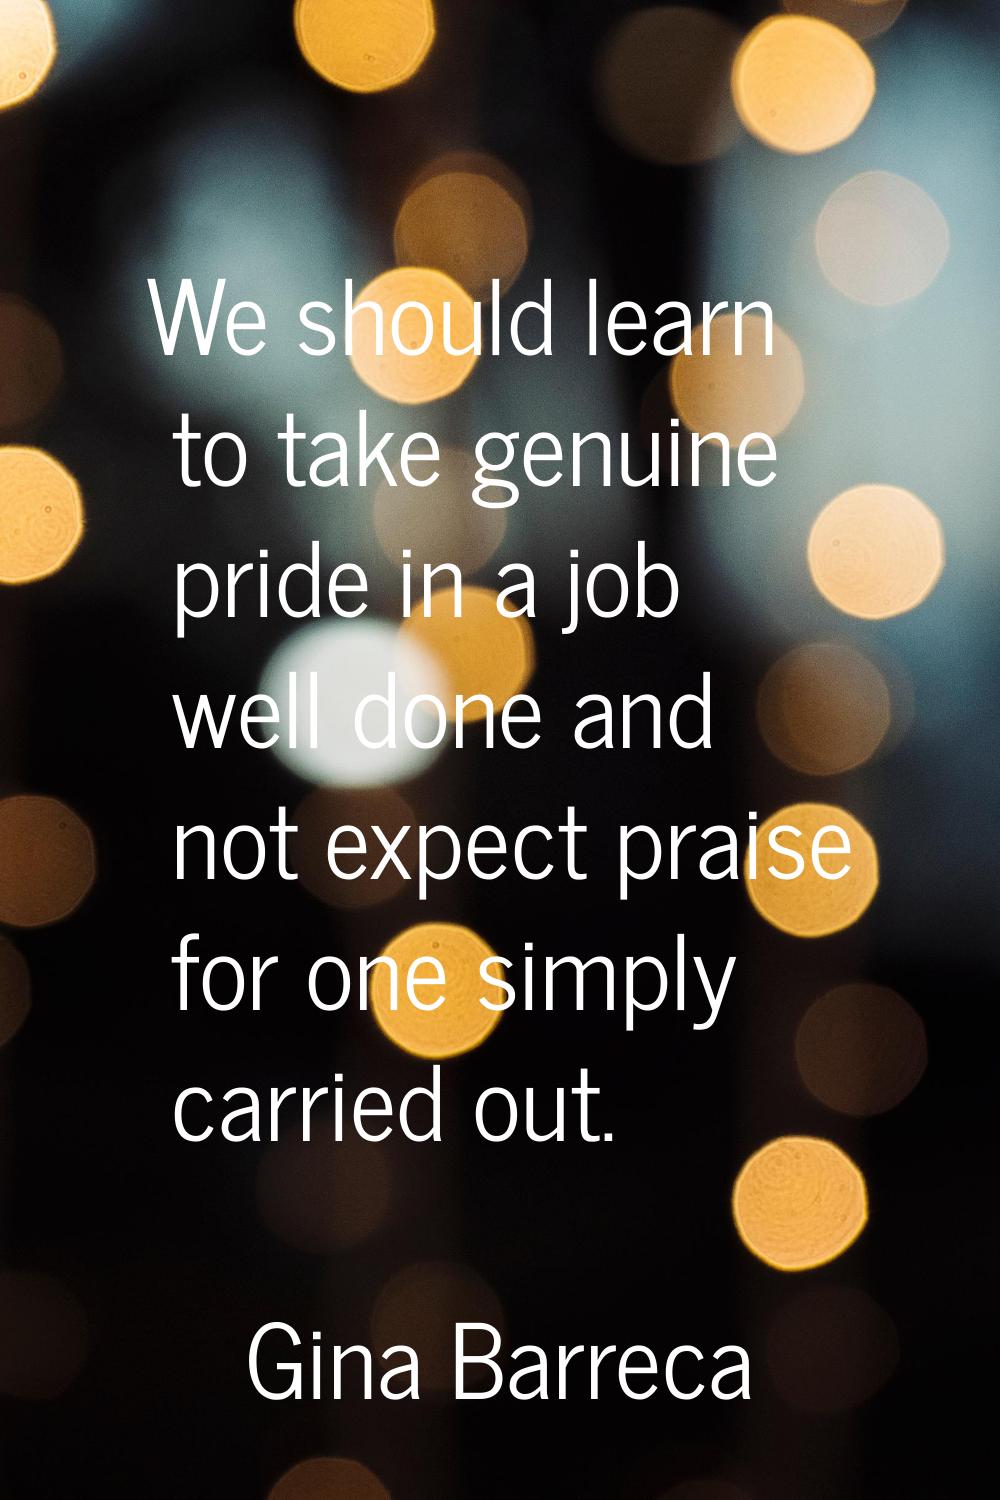 We should learn to take genuine pride in a job well done and not expect praise for one simply carri